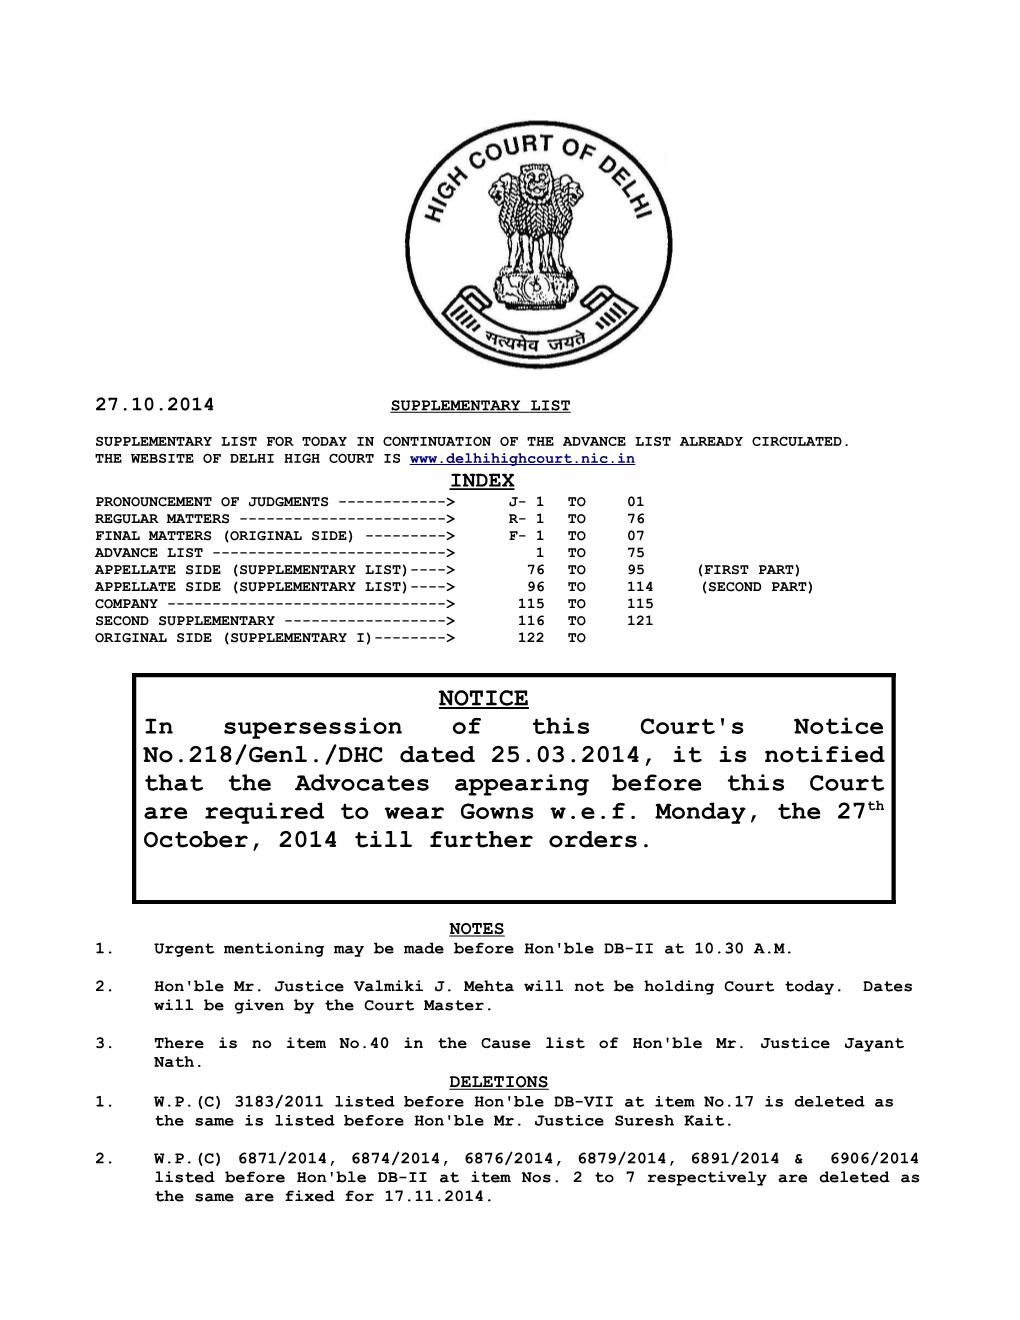 NOTICE in Supersession of This Court's Notice No.218/Genl./DHC Dated 25.03.2014, It Is Notified That the Advocates Appearing